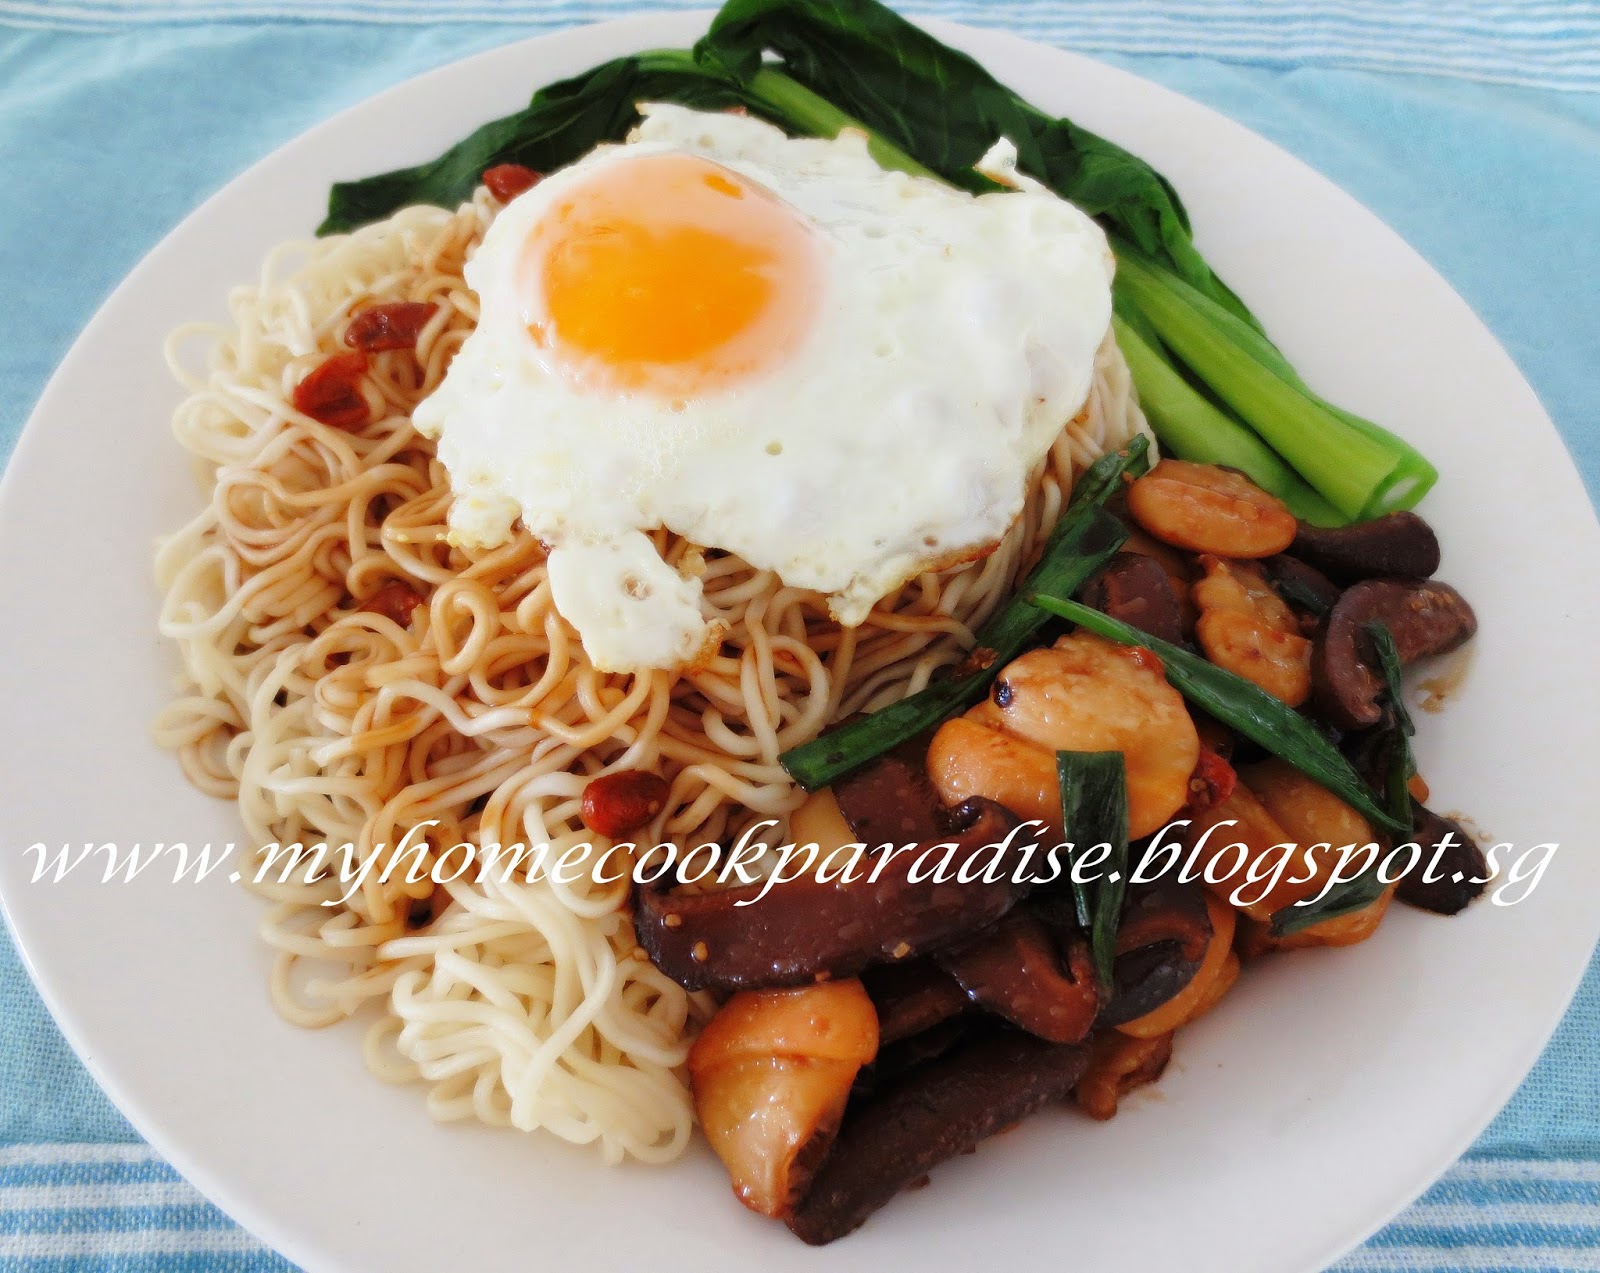 http://myhomecookparadise.blogspot.sg/2014/06/noodles-with-stir-fry-clams-shiitake.html